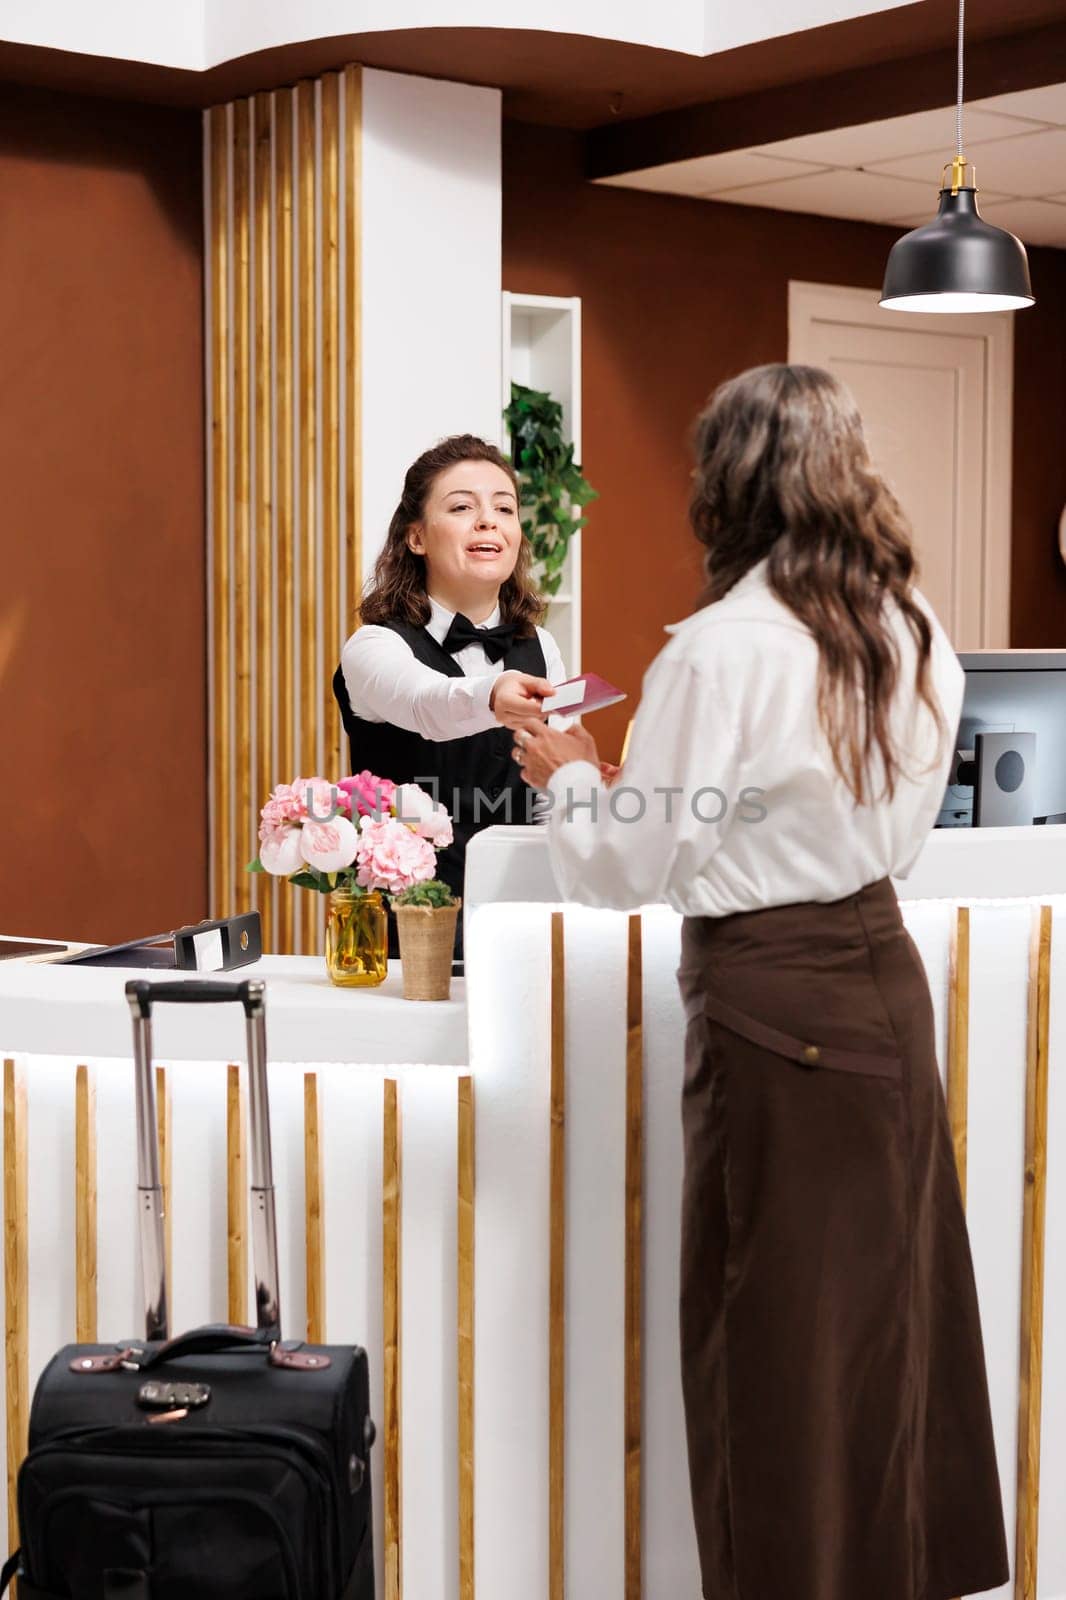 Smooth guest check-in at hotel reception by DCStudio